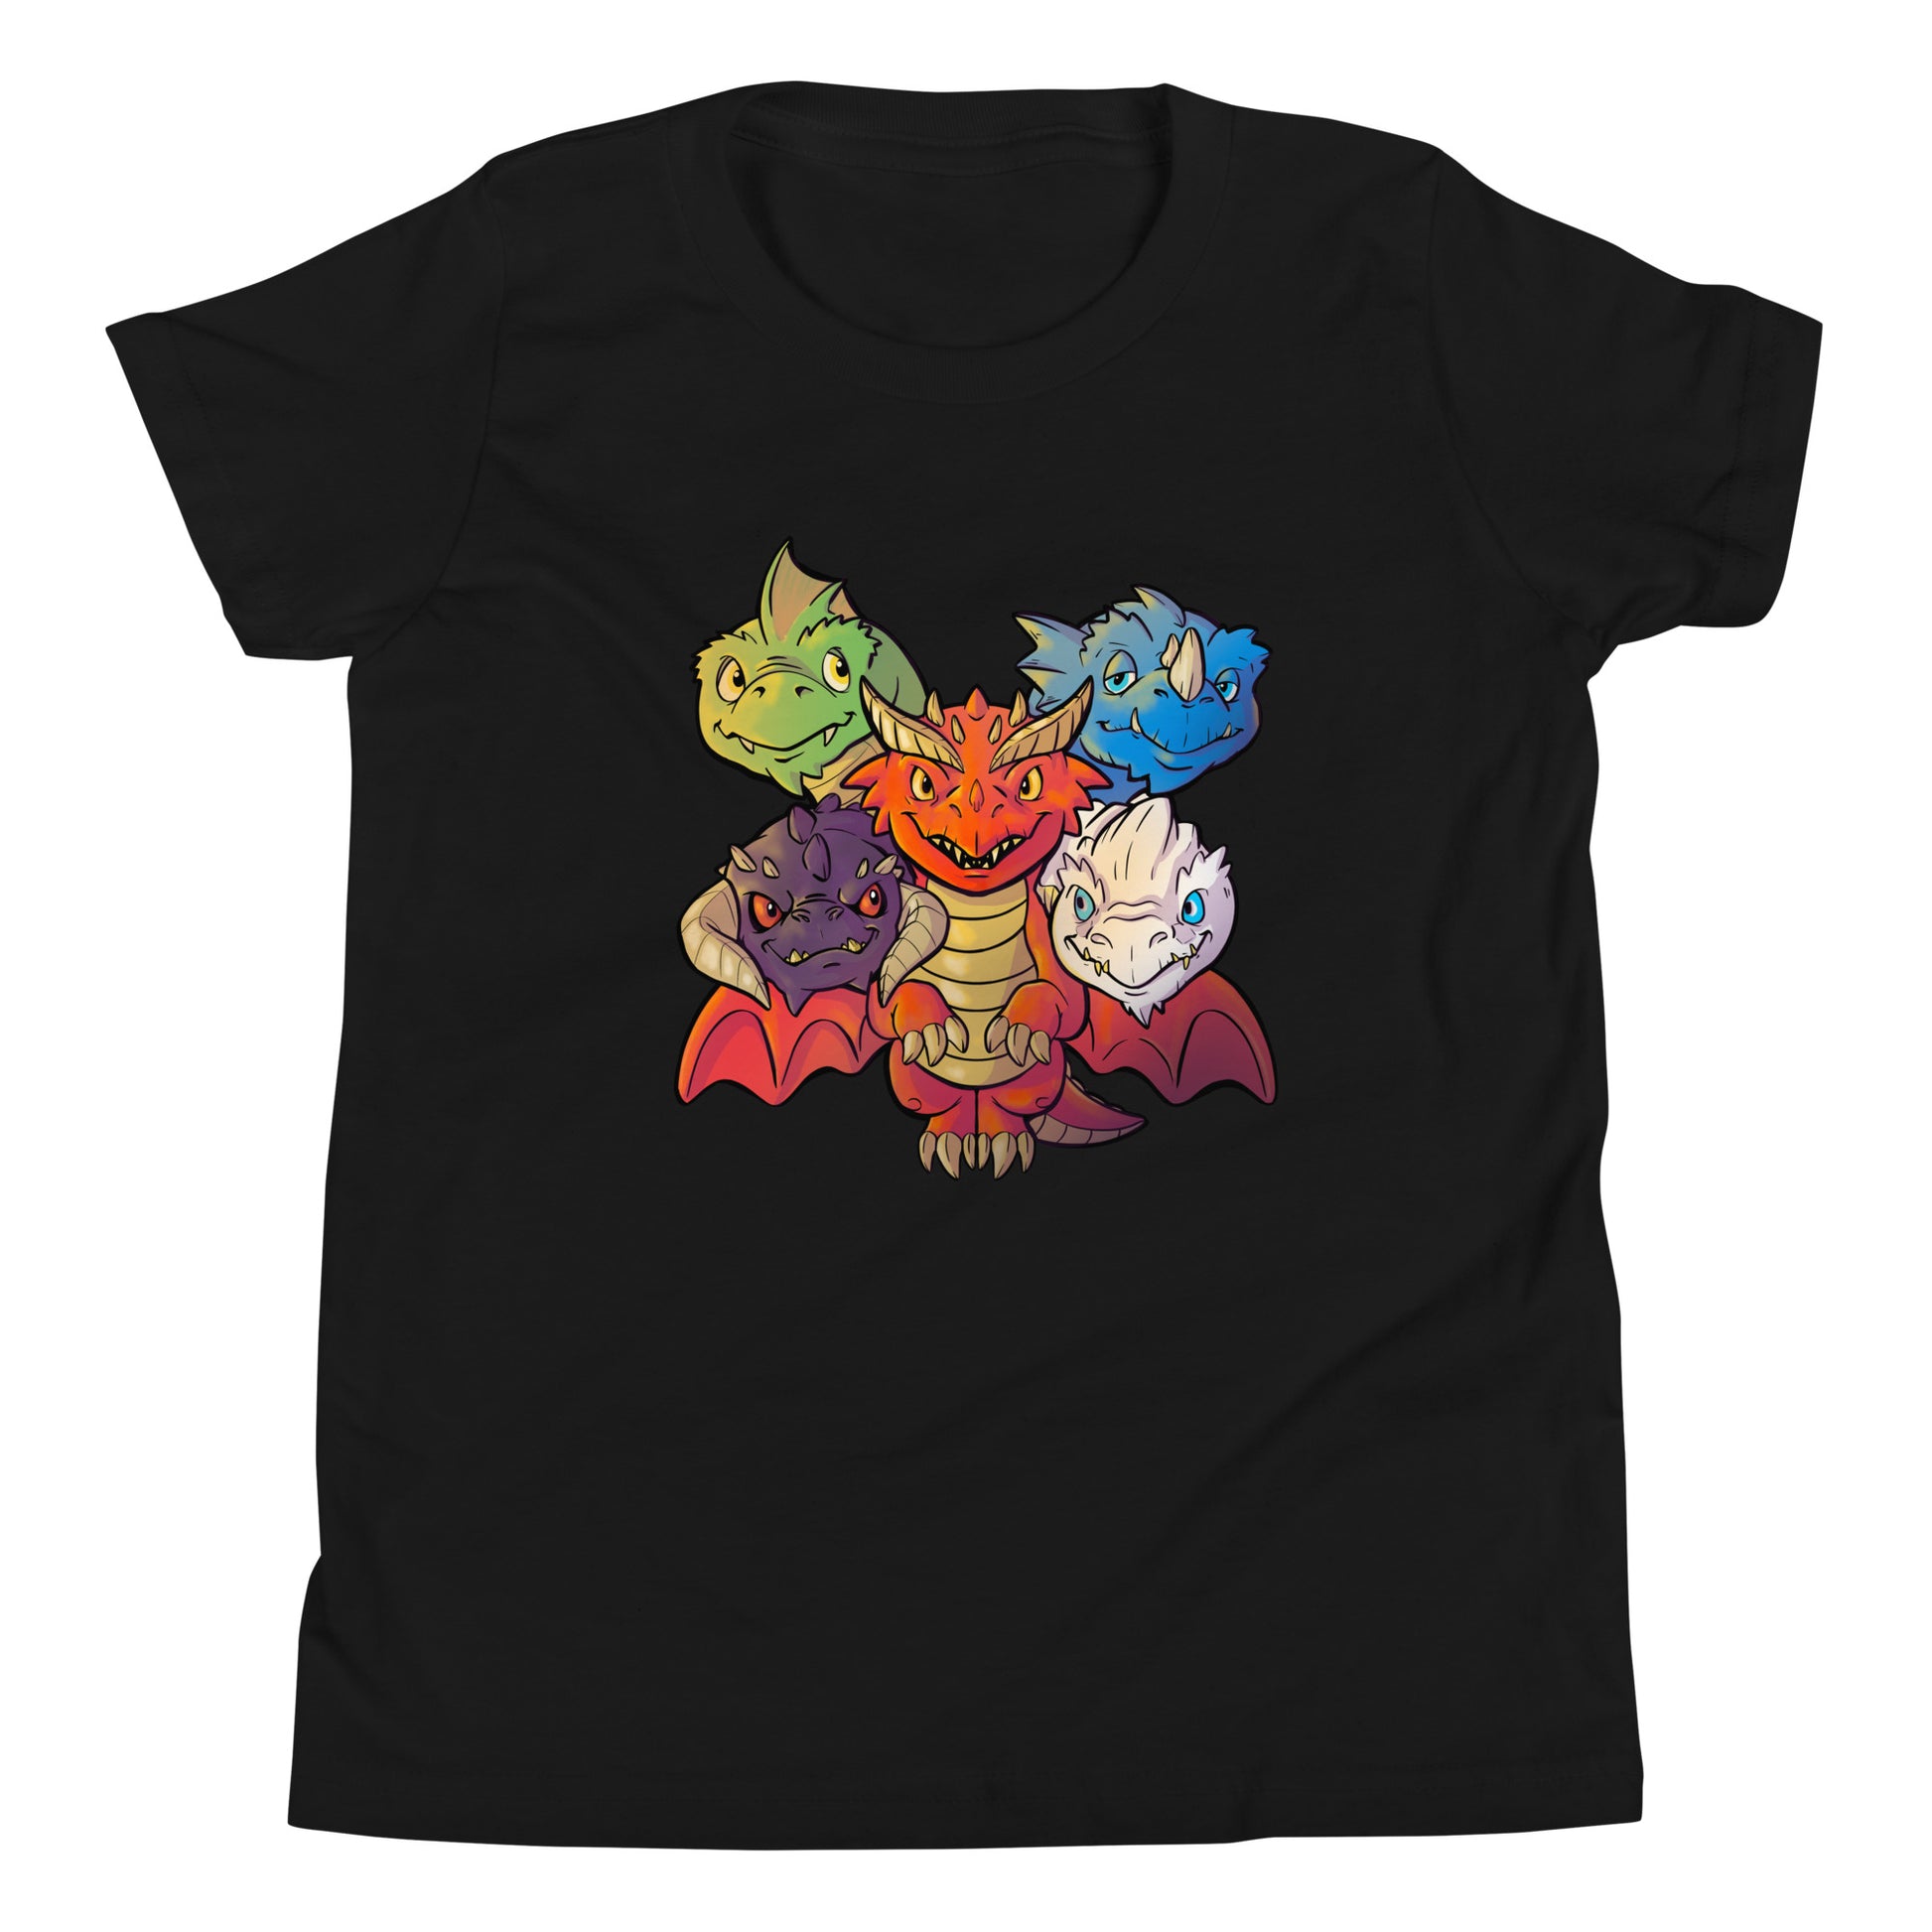 Little Queen of Dragons Youth Short Sleeve T-Shirt  Level 1 Gamers Black S 